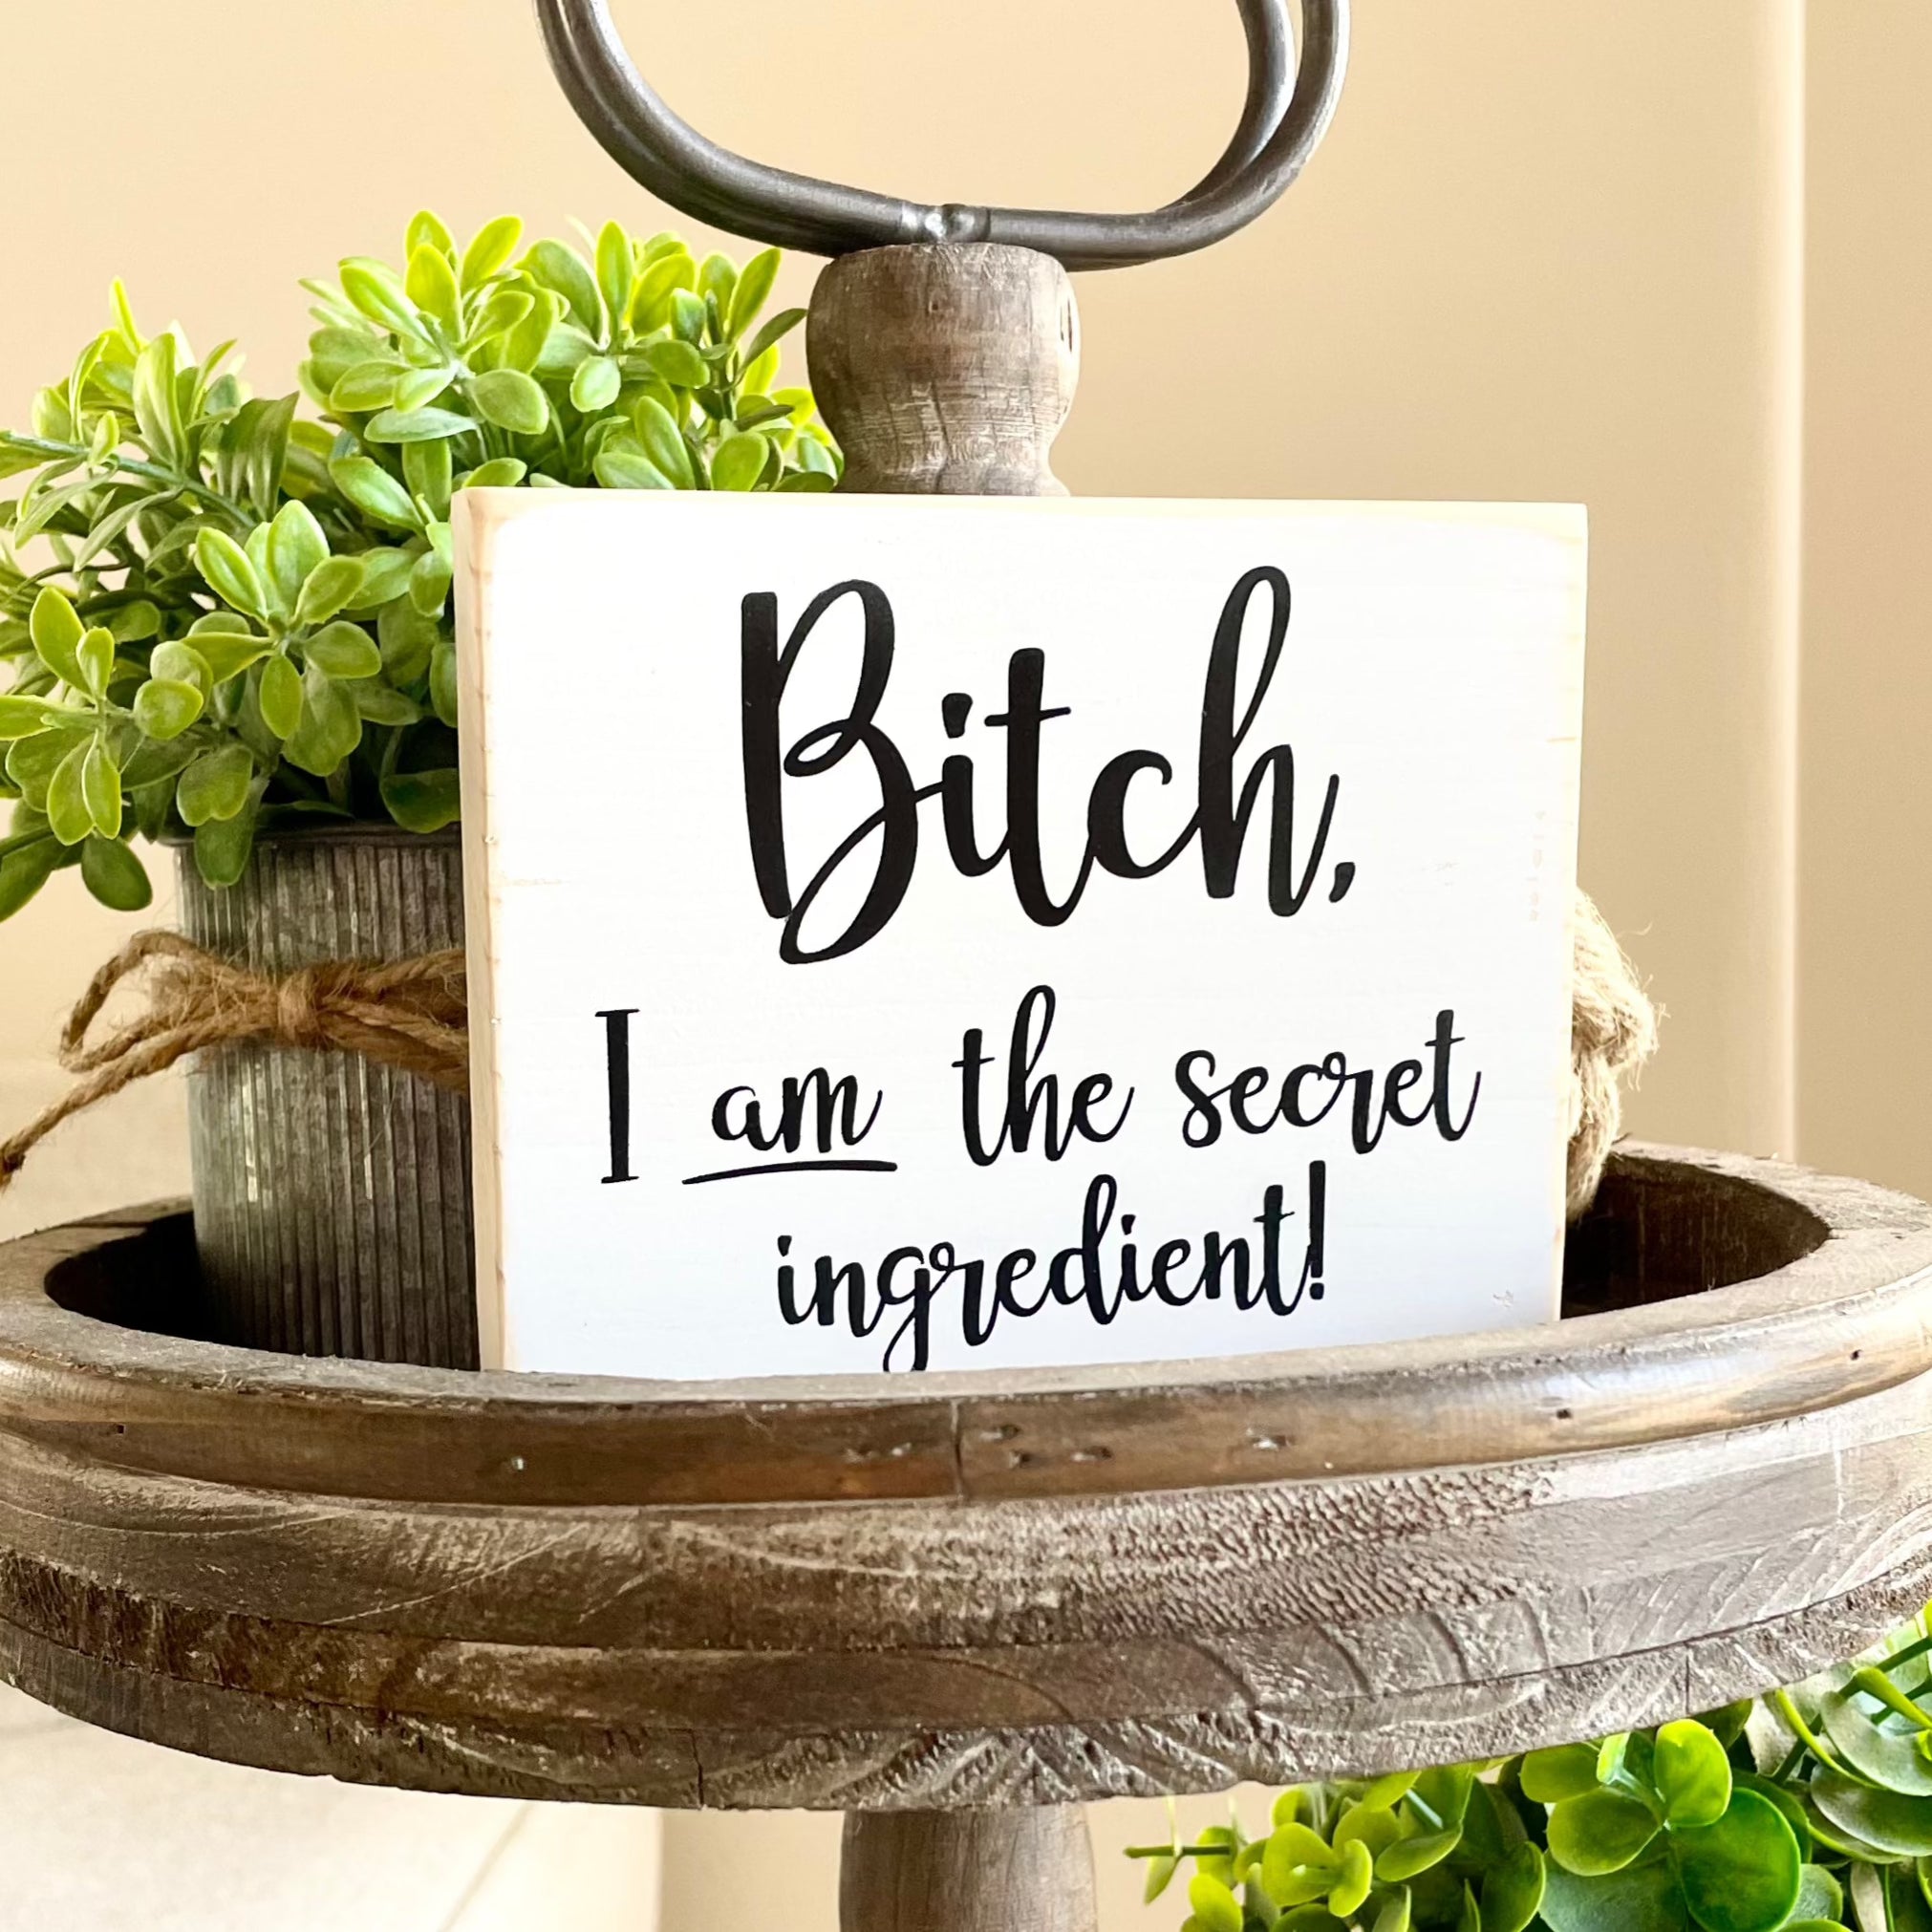 A small, white, wood sign sits on a tiered tray. The sign says, in black, "Bitch, I am the secret ingredient".